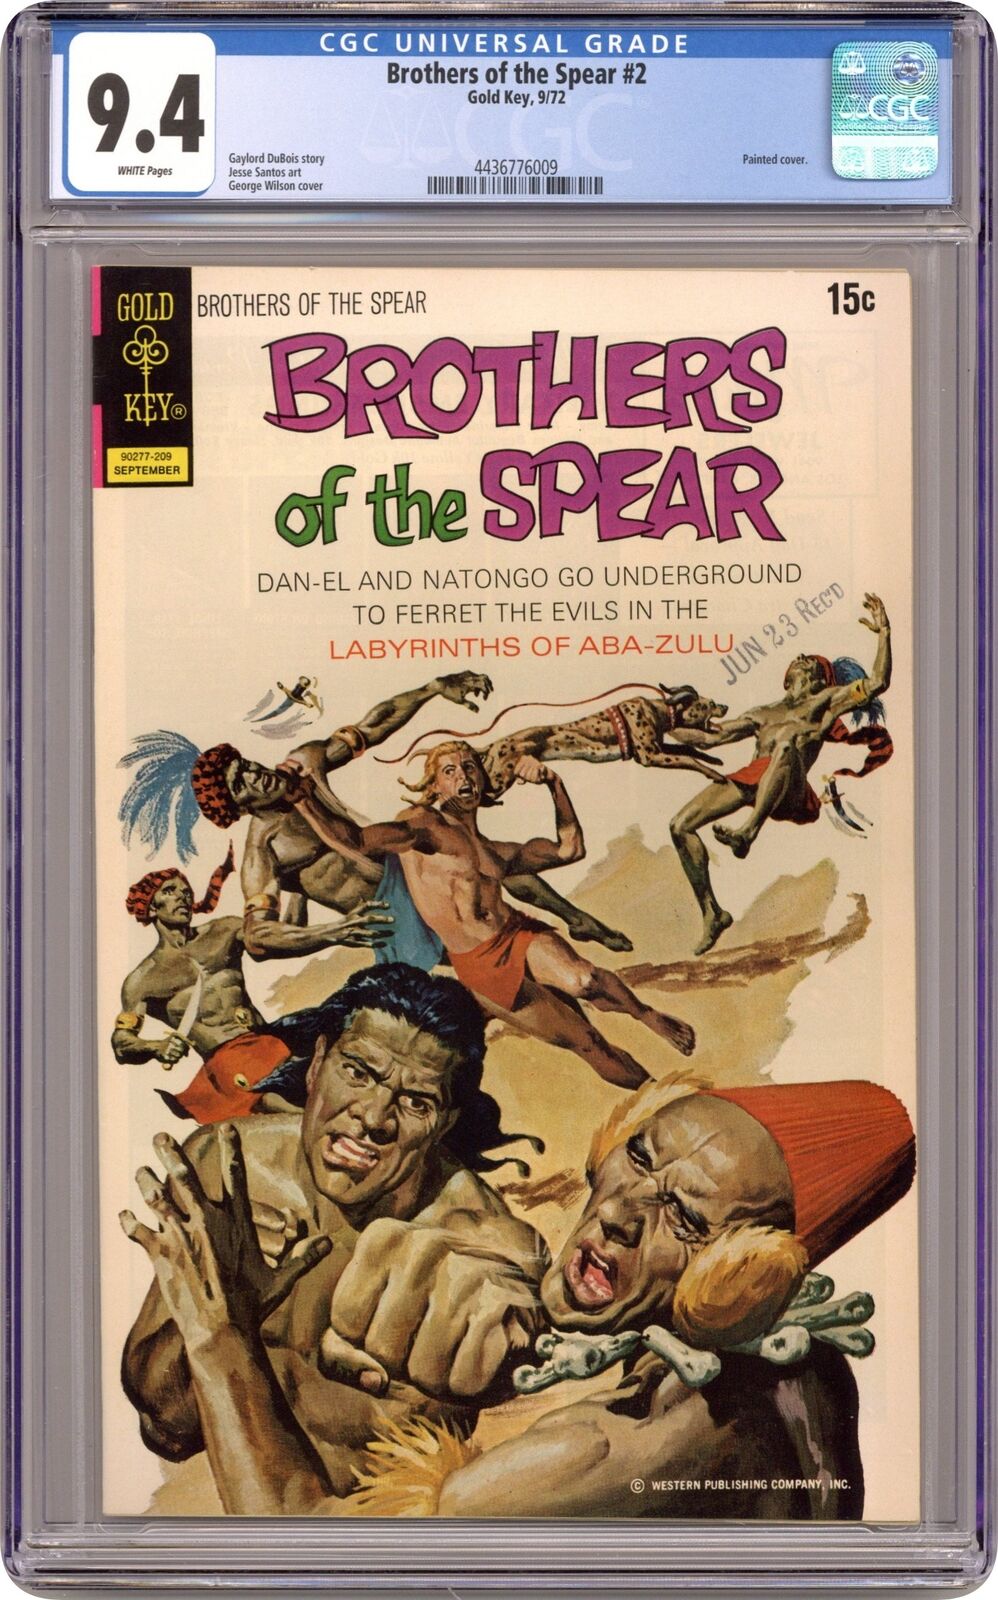 Brothers of the Spear #2 CGC 9.4 1972 Gold Key 4436776009